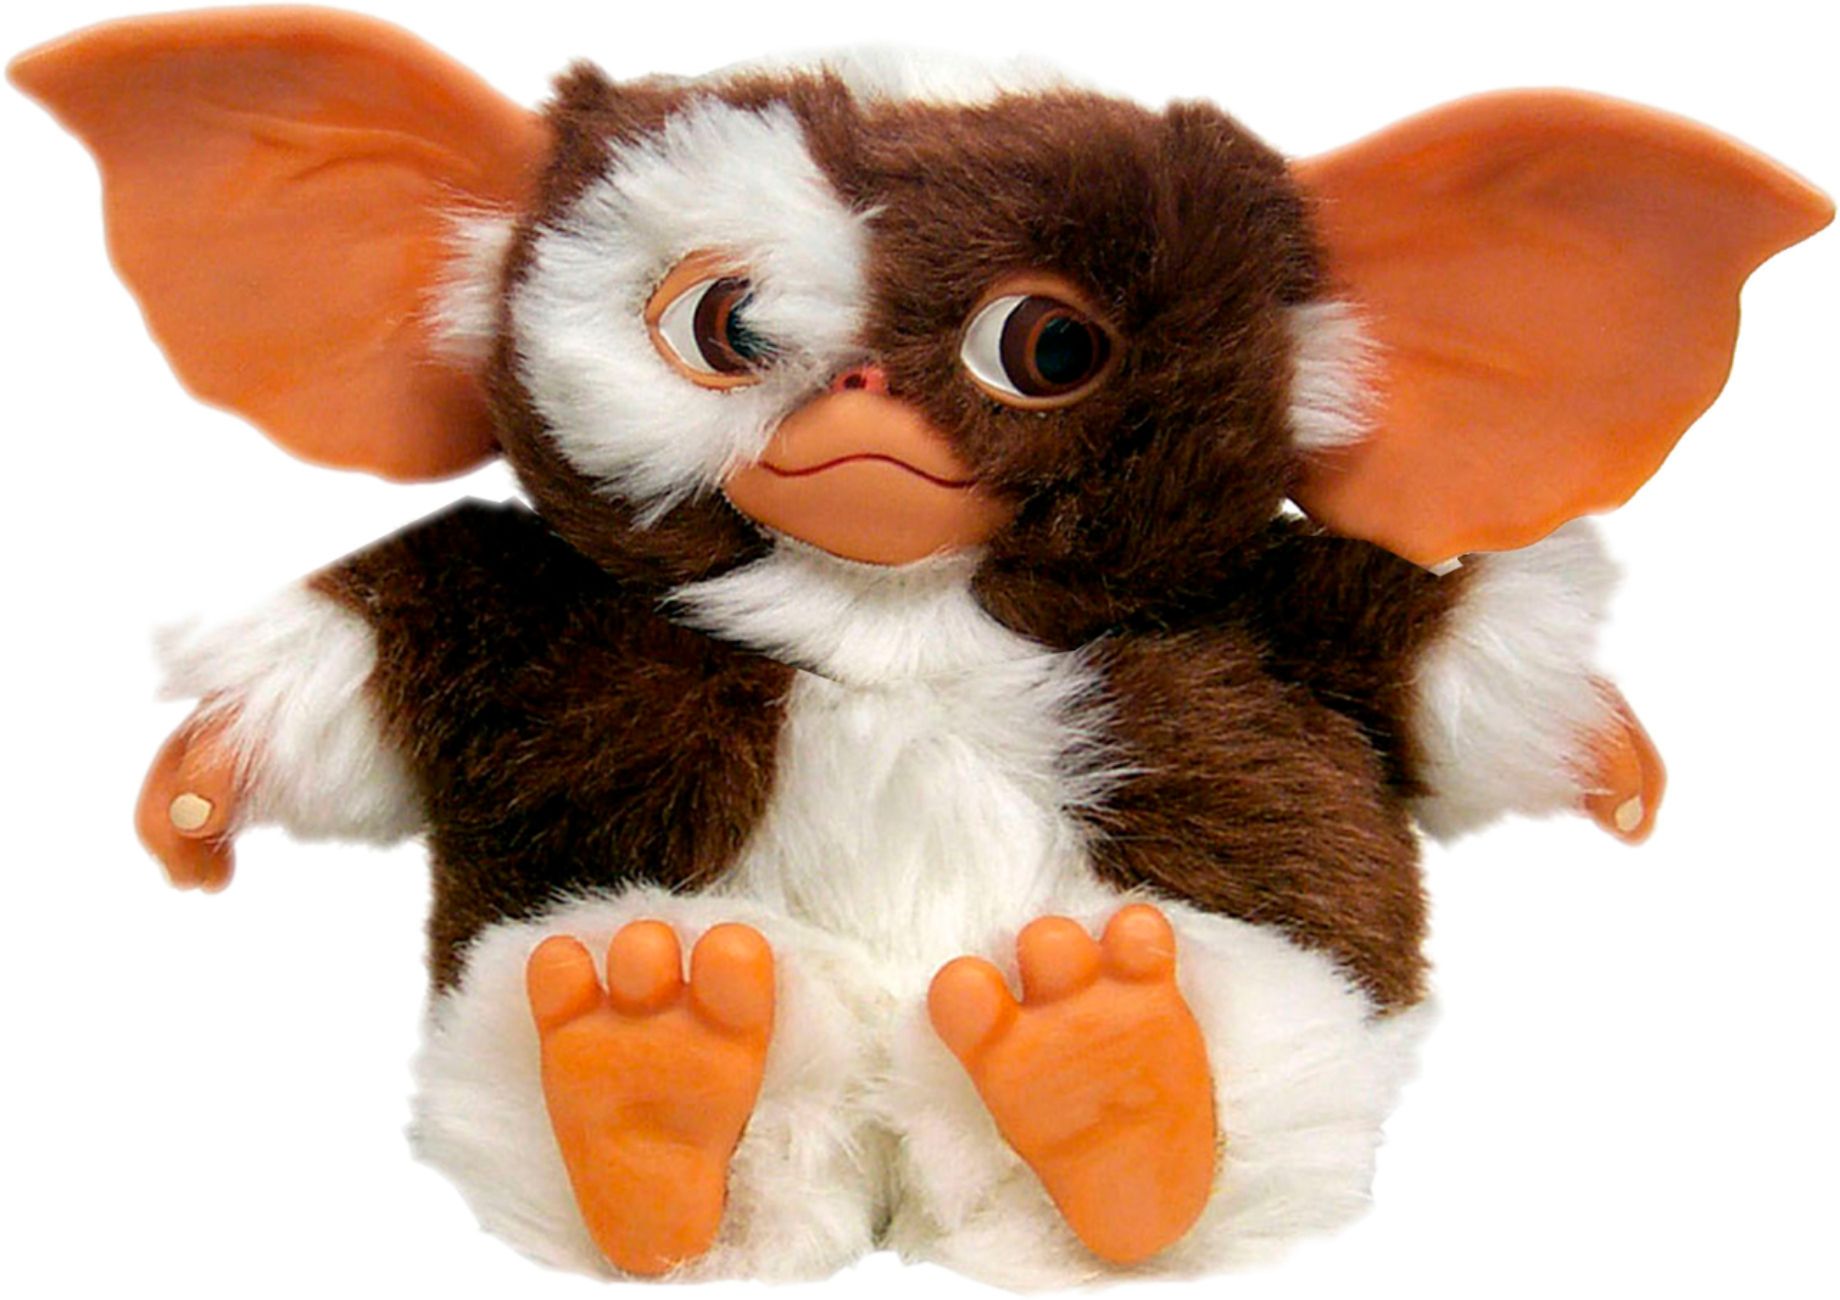 NECA - Gremlins Electronic Dancing Plush Doll Gizmo, Measures 8 Tall, Large